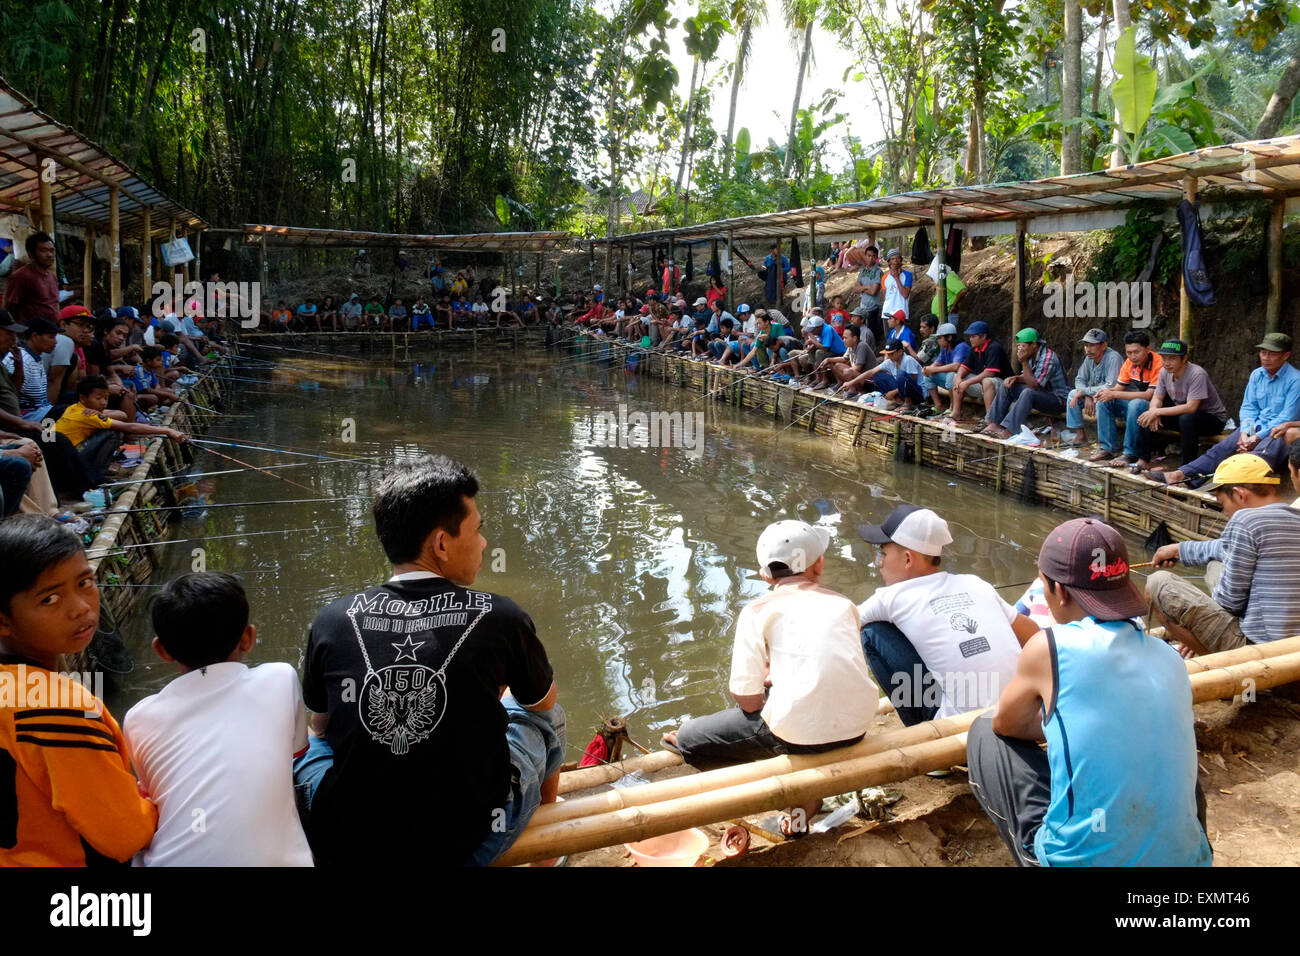 fishing indonesian style at a popular rural village man made pool